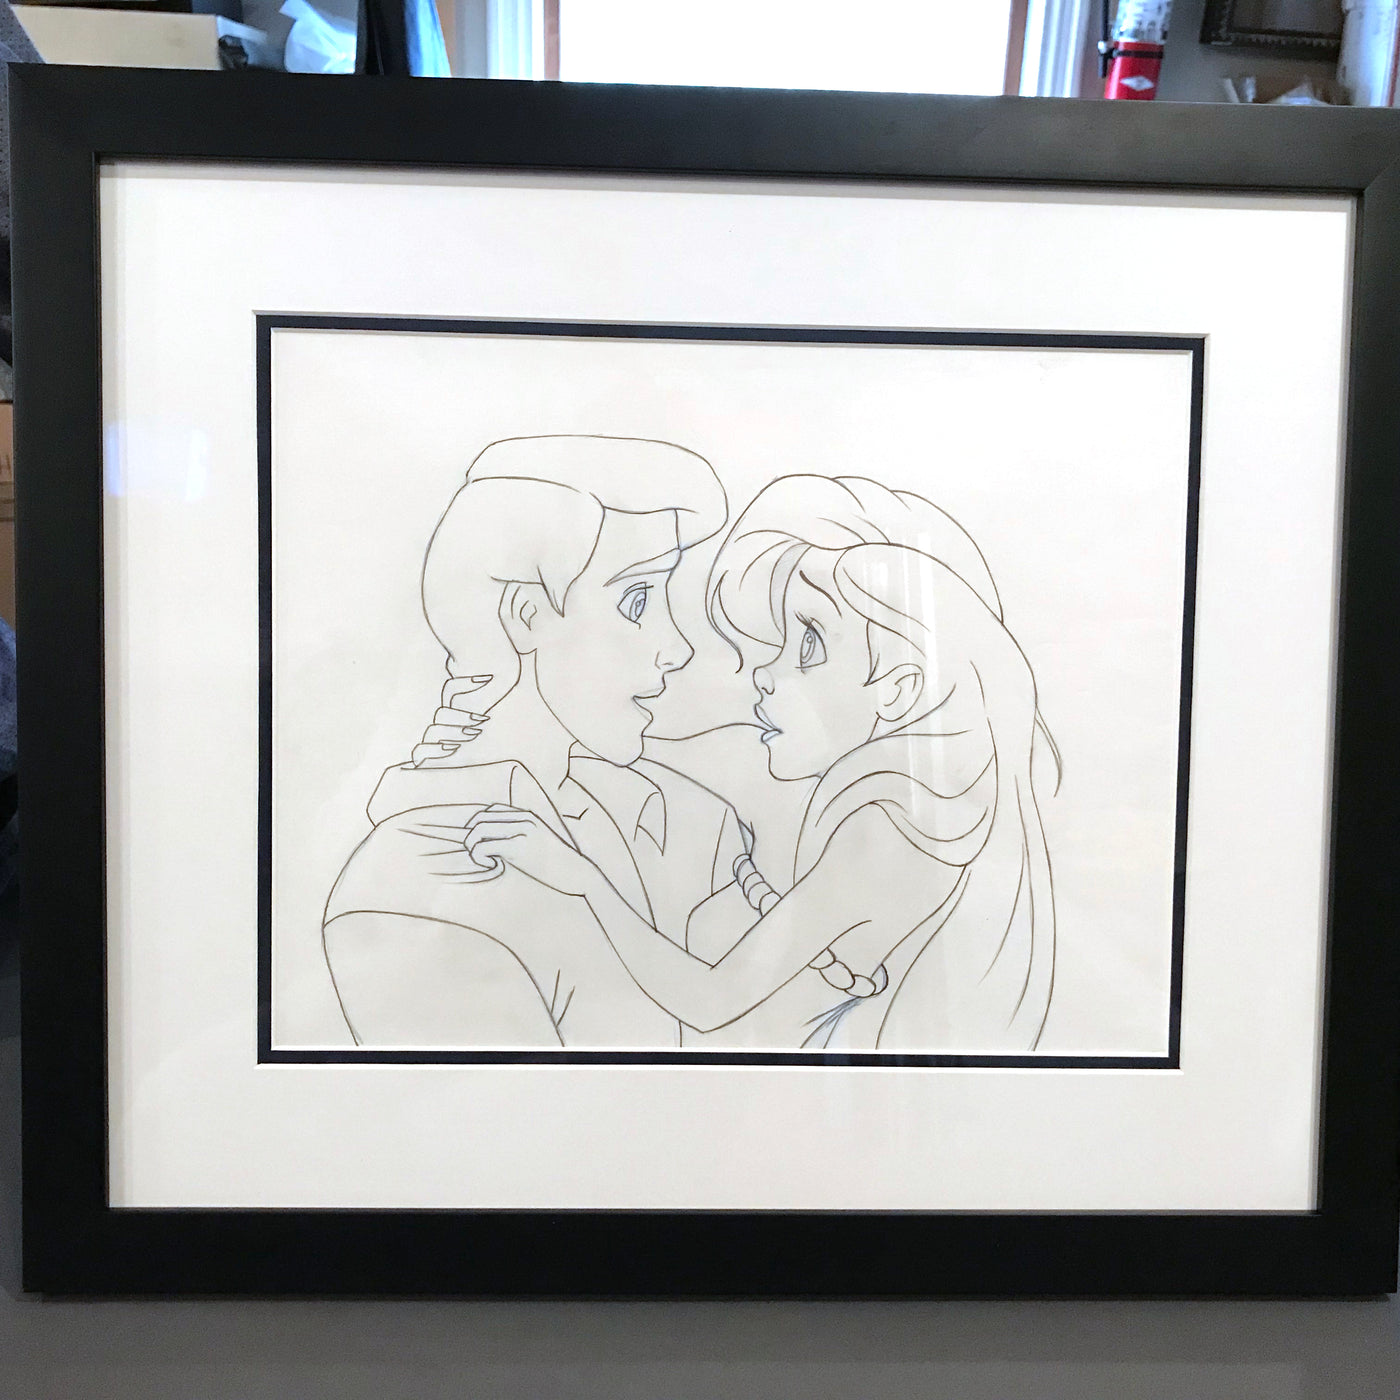 Original Walt Disney Production Drawing From The Little Mermaid featuring Eric and Ariel